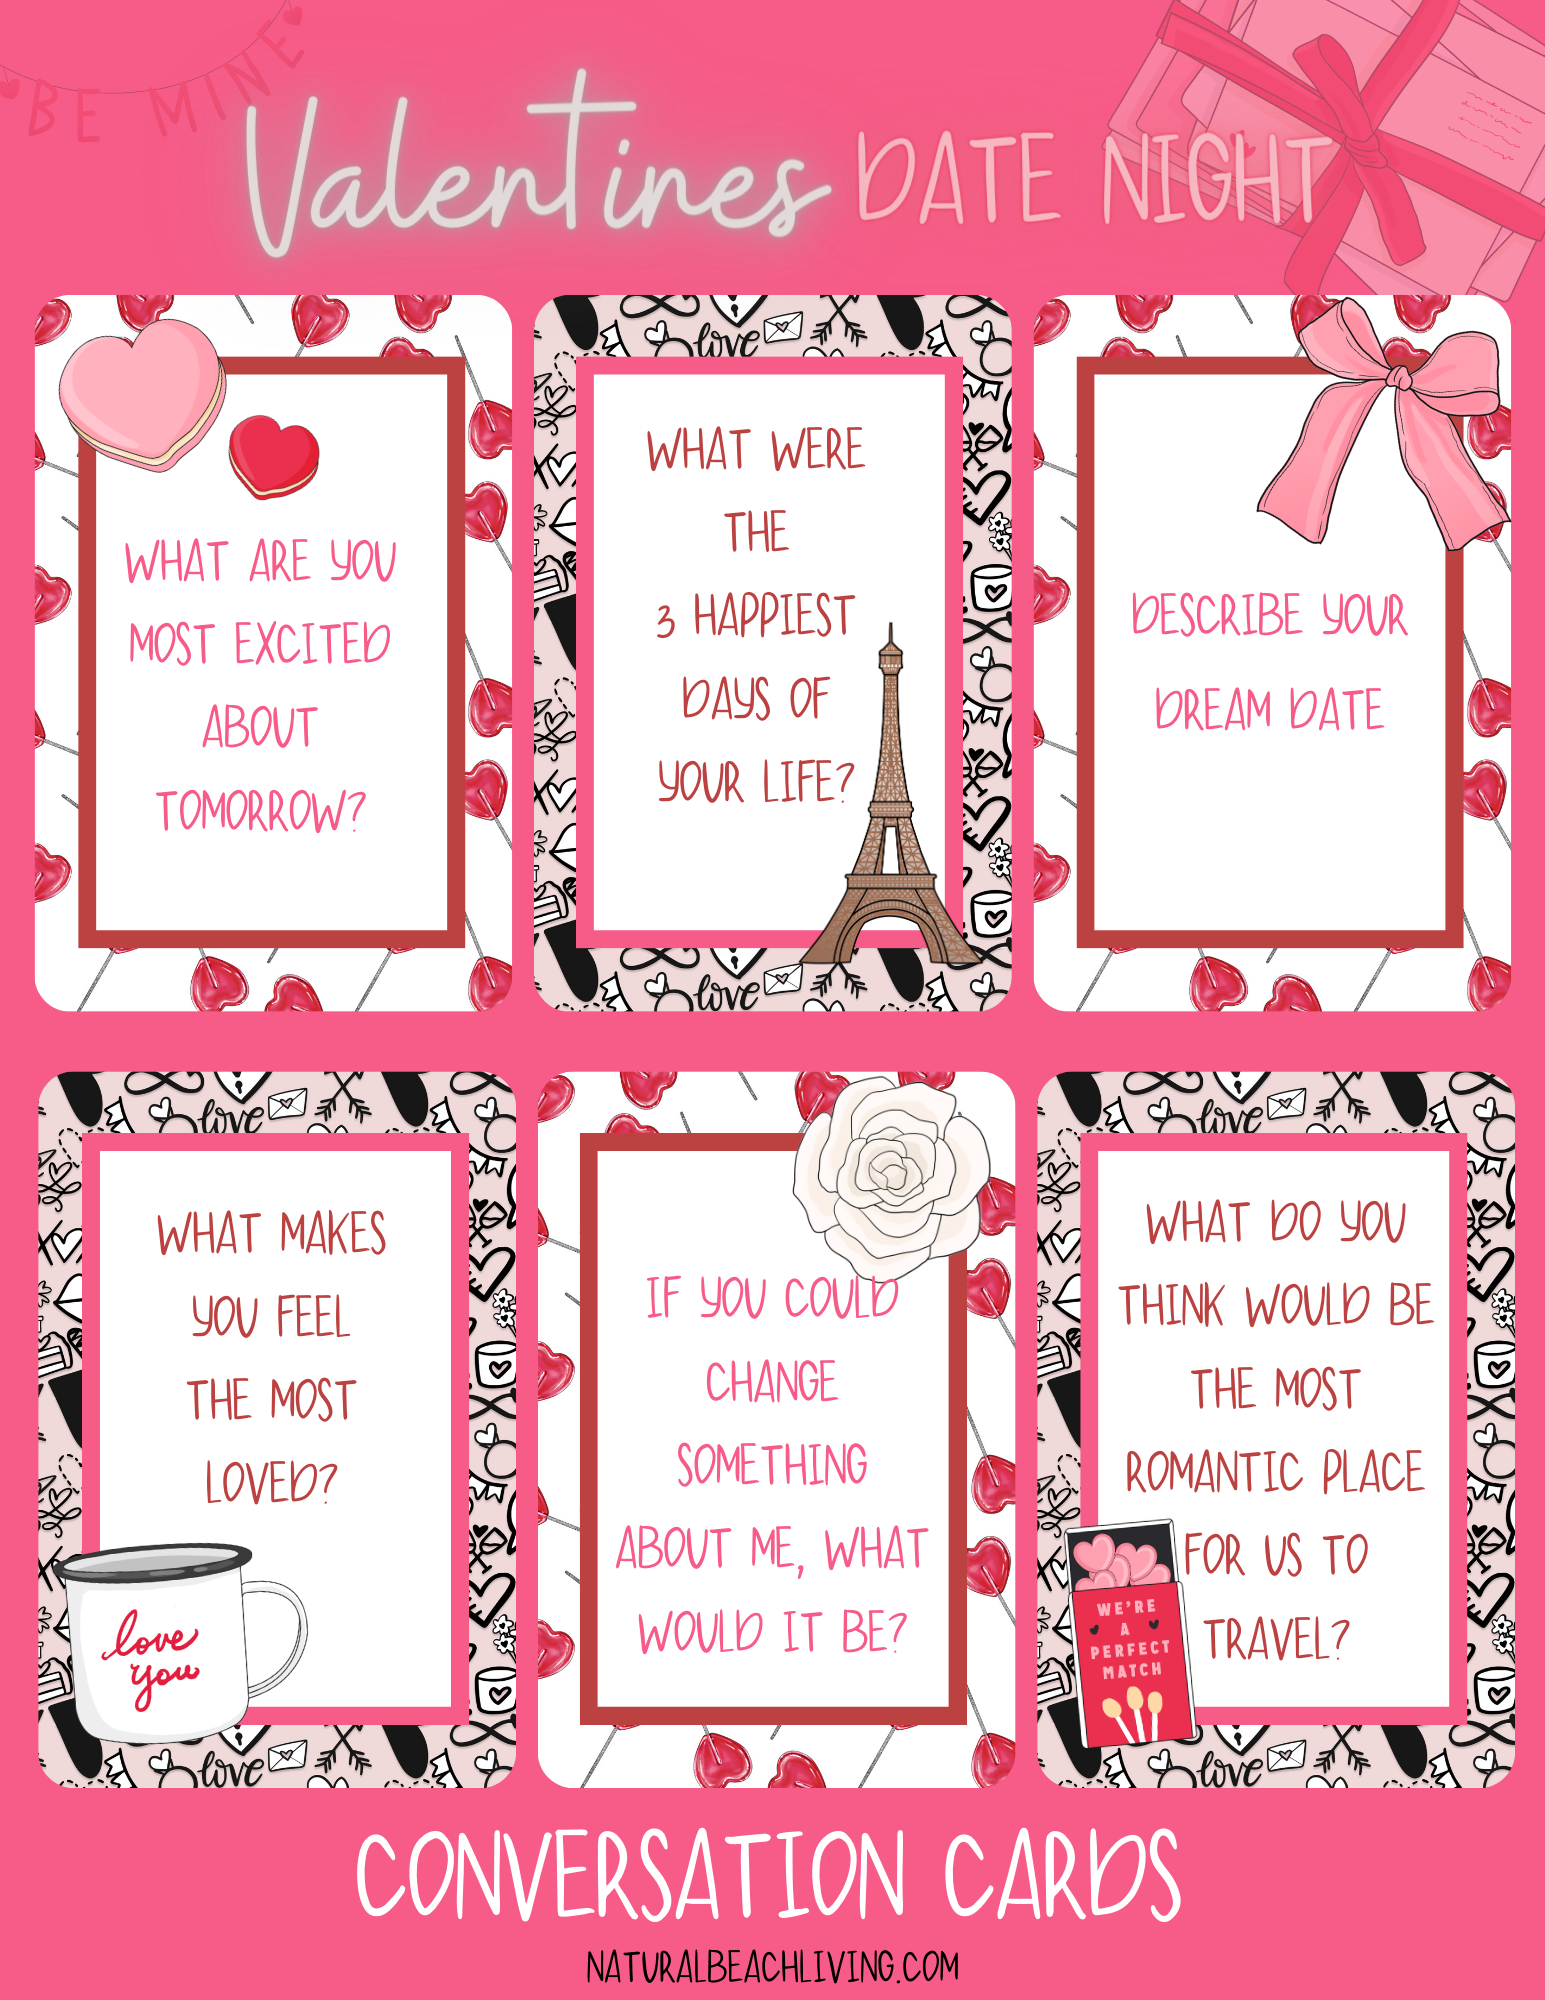 Valentine's Day Date Night Cards, These Free Printable Conversation Cards are thoughtful and fun. They will help you be more spontaneous in your romantic life, offering a range of ideas for conversations and sweet thoughts you can enjoy. Find THE BEST DATE NIGHT IDEAS HERE!